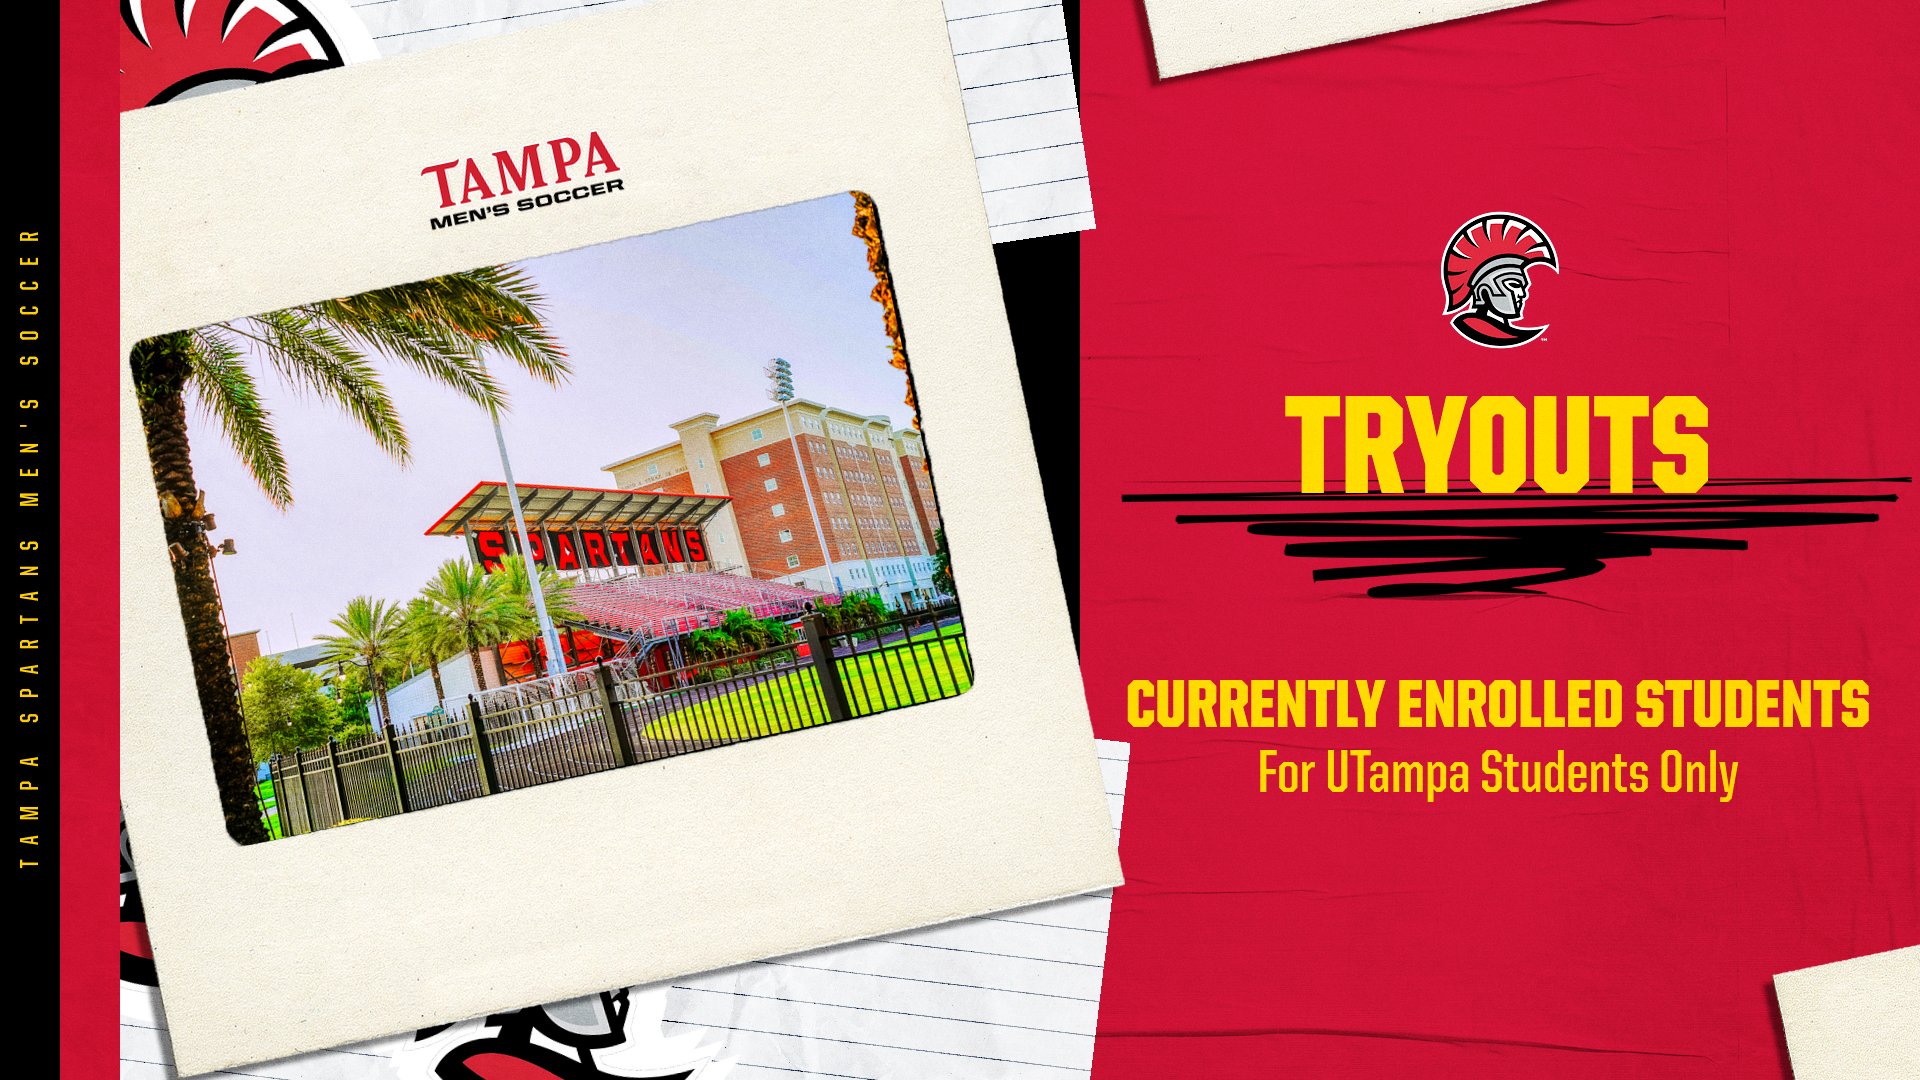 University of Tampa Men's Soccer Tryouts